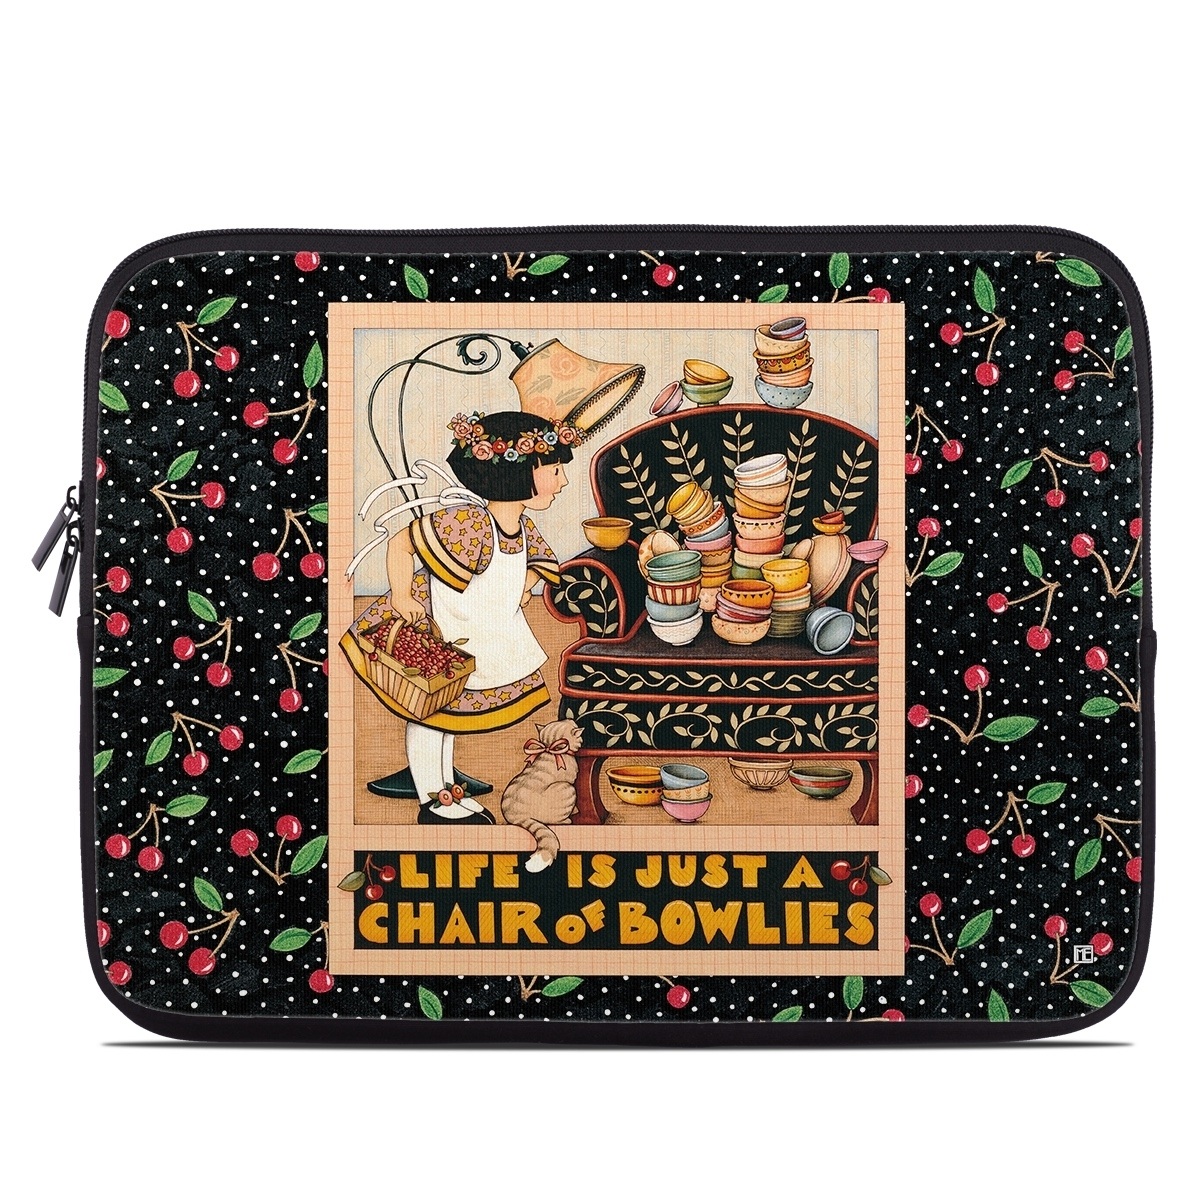 Laptop Sleeve - Chair of Bowlies (Image 1)